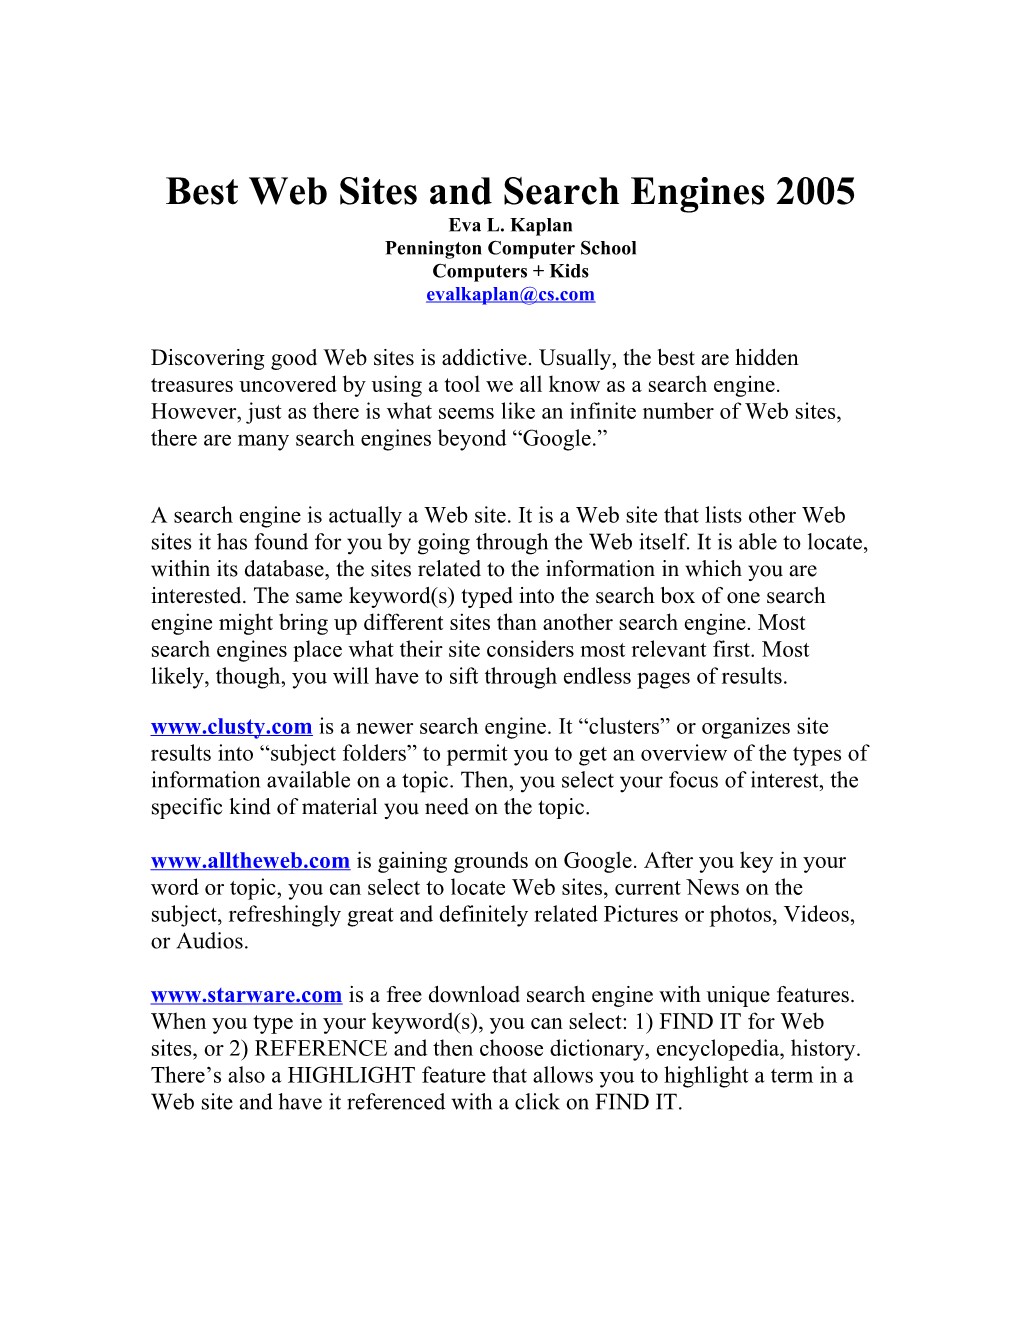 Best Web Sites and Search Engines 2005